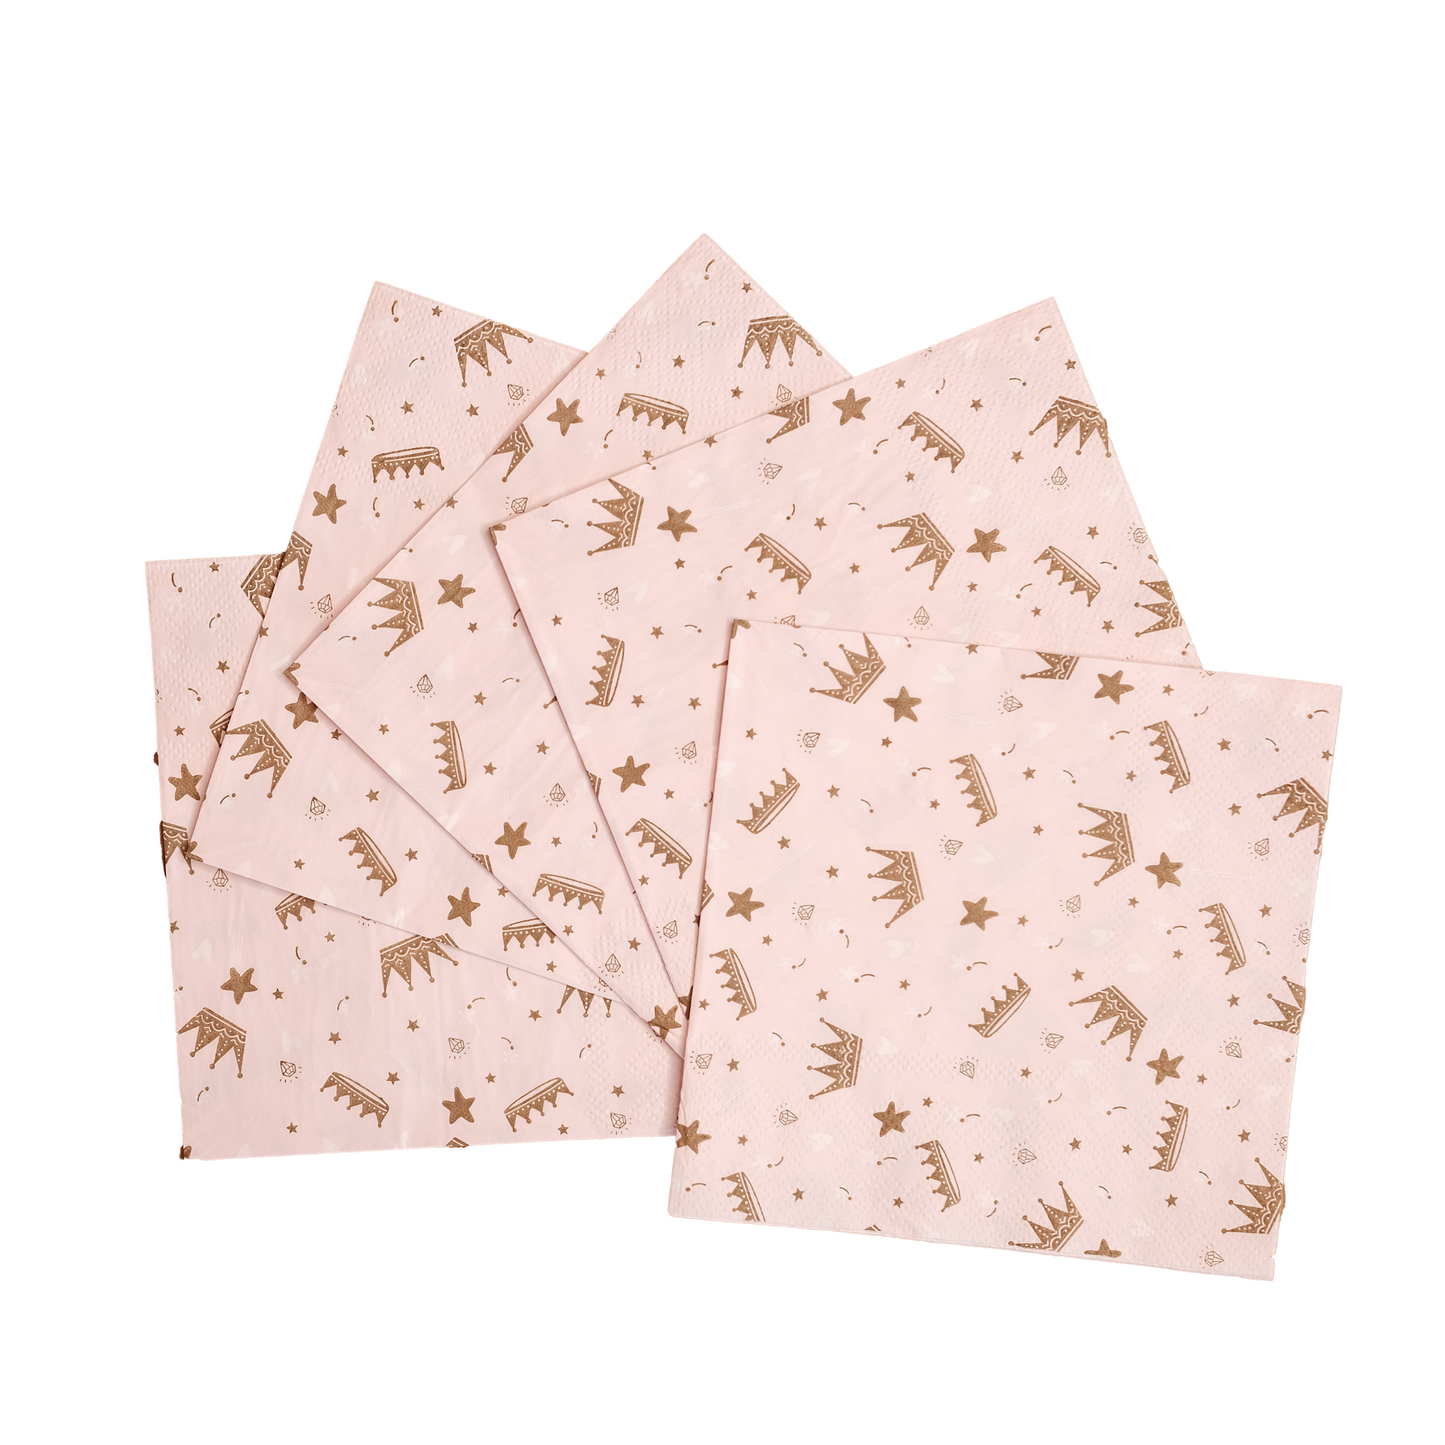 Pink with Crown Patterned Napkins (Set of 20)